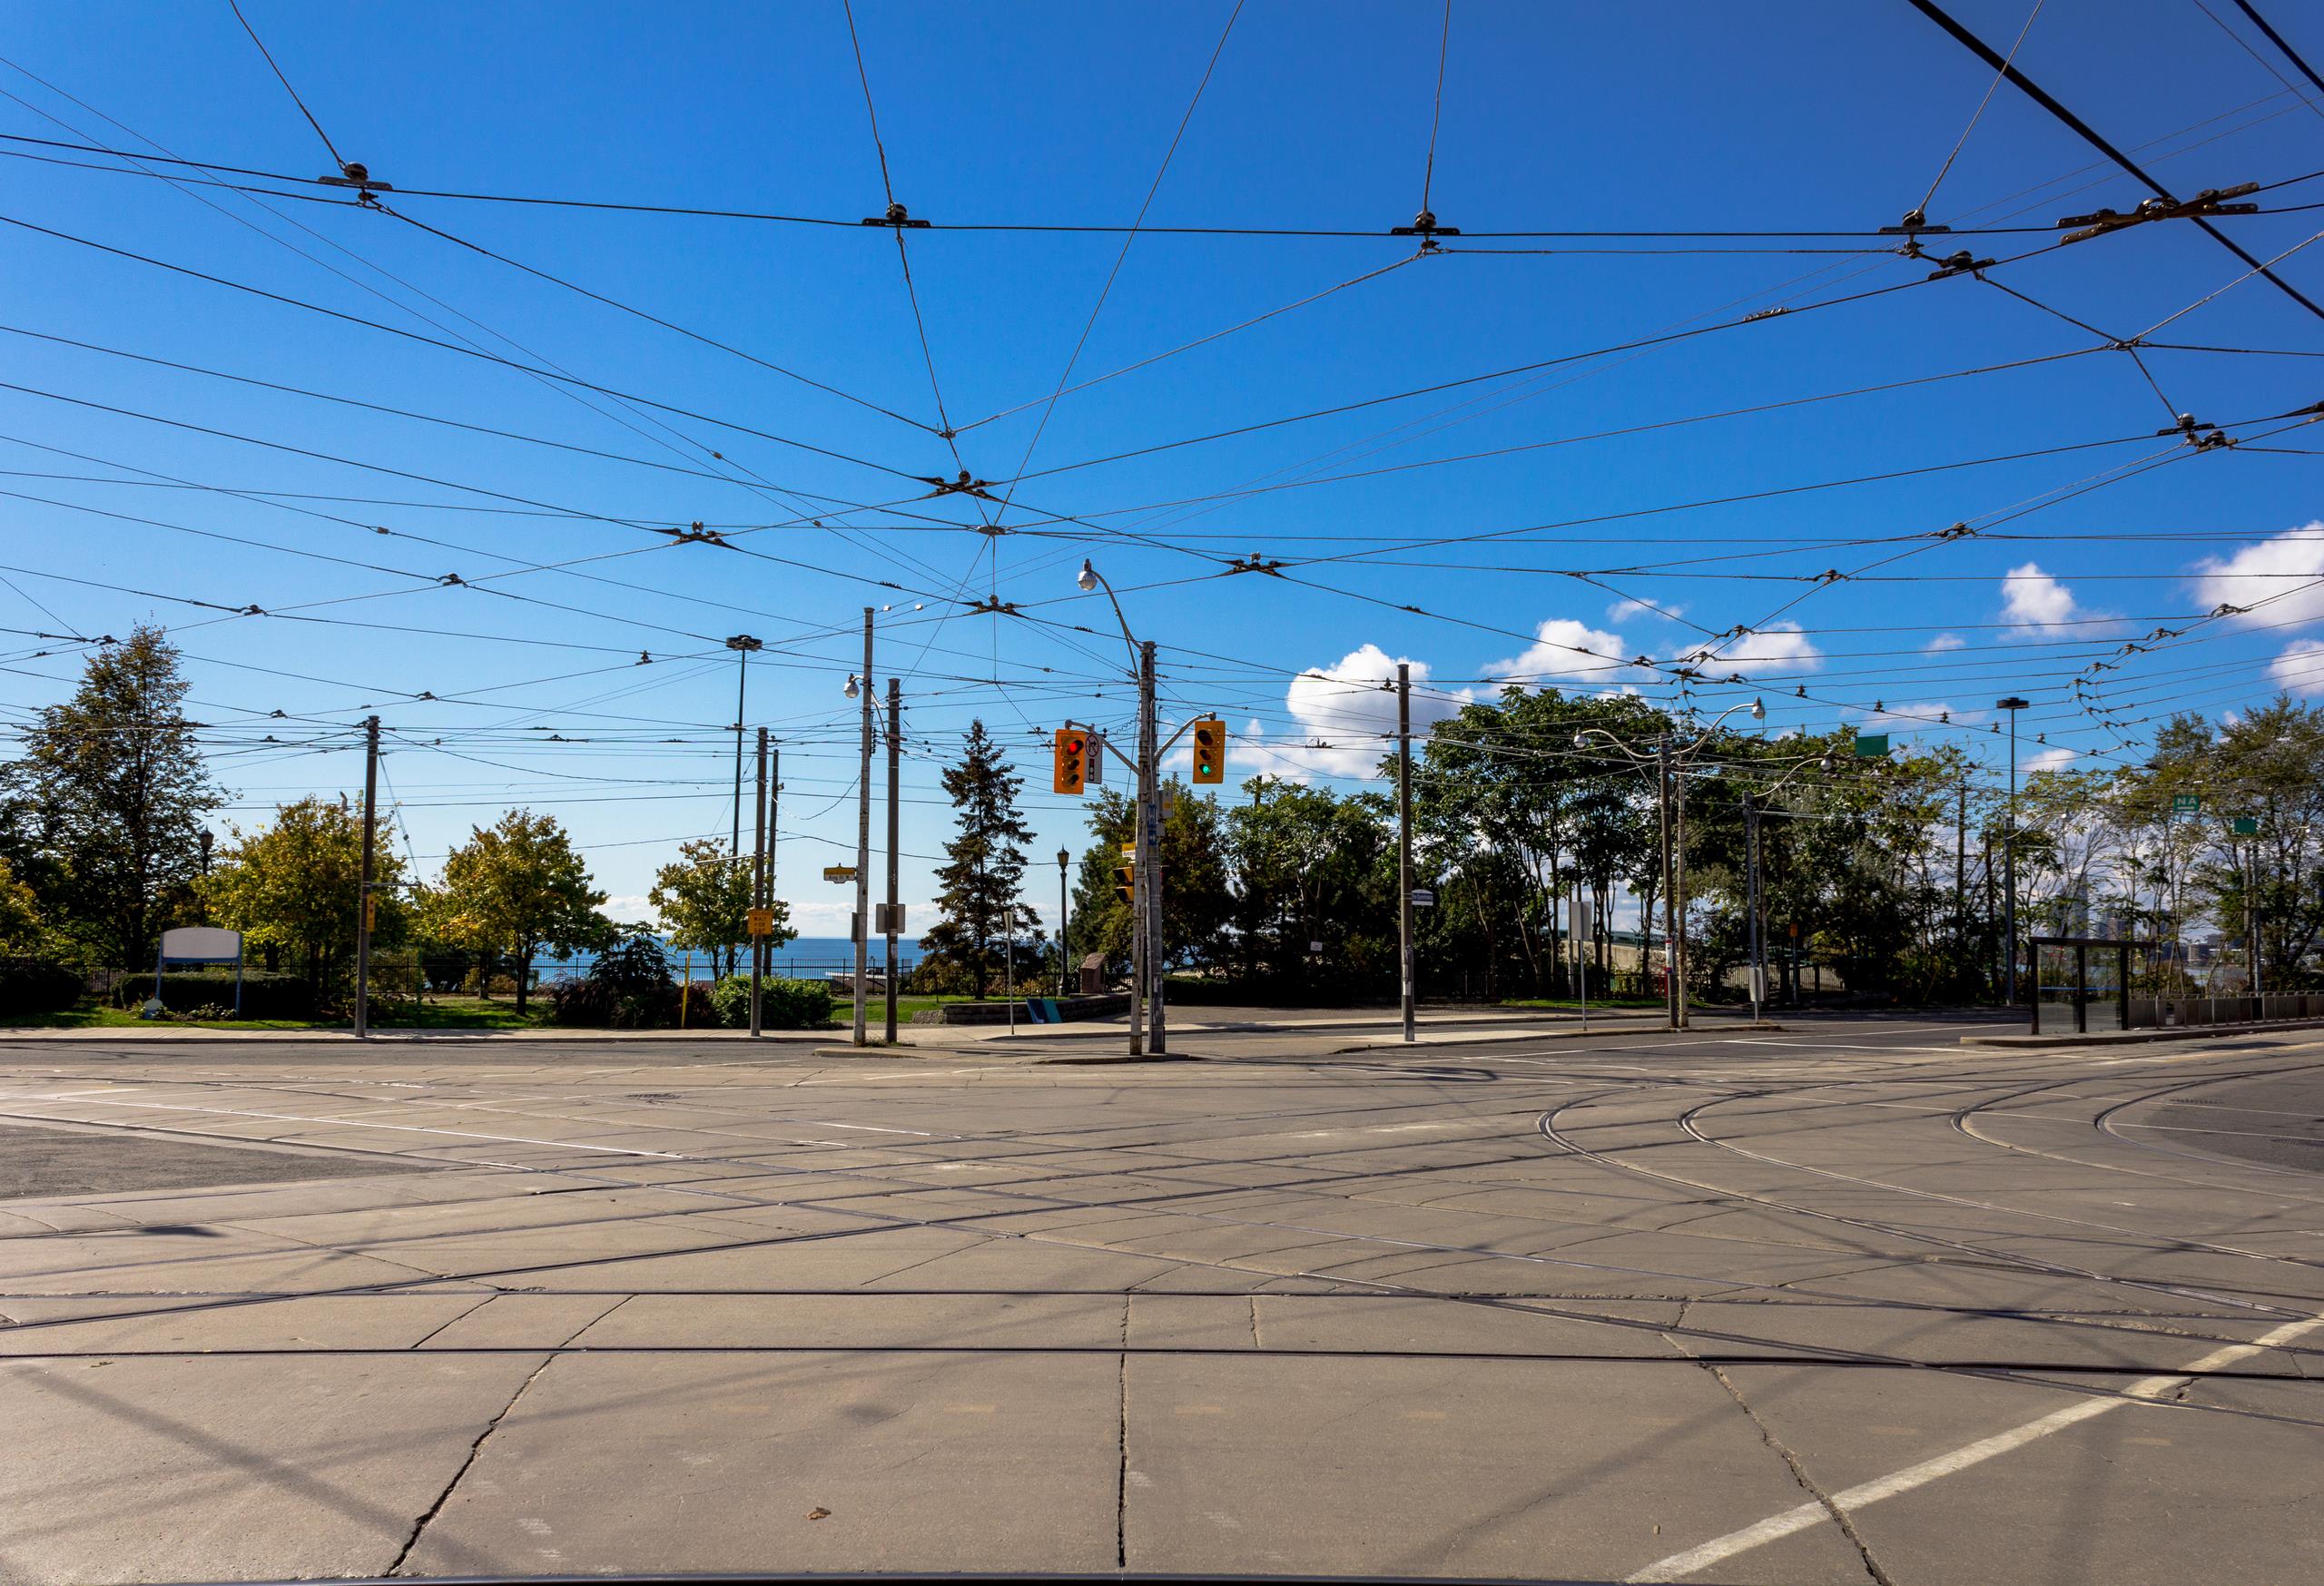 An empty traffic junction with power cables running overhead